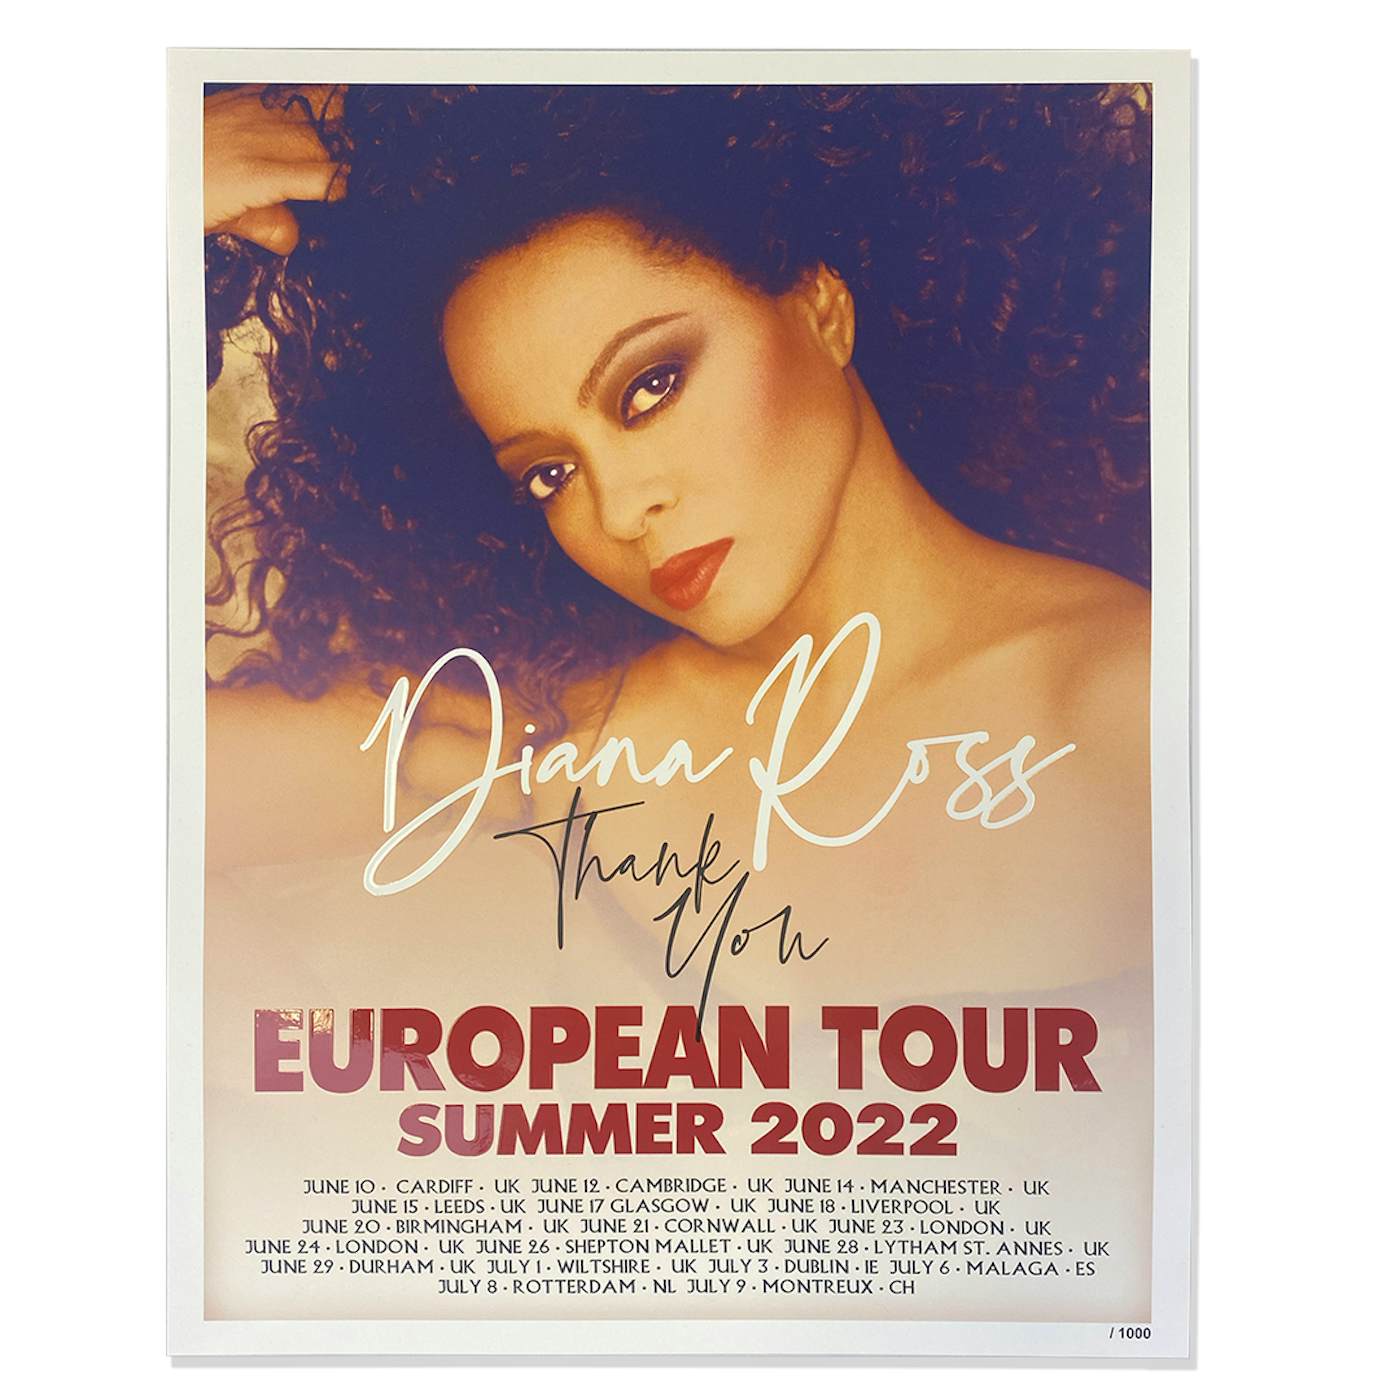 Diana Ross "Thank You" Limited Edition EUROPEAN Tour Poster in Red Print